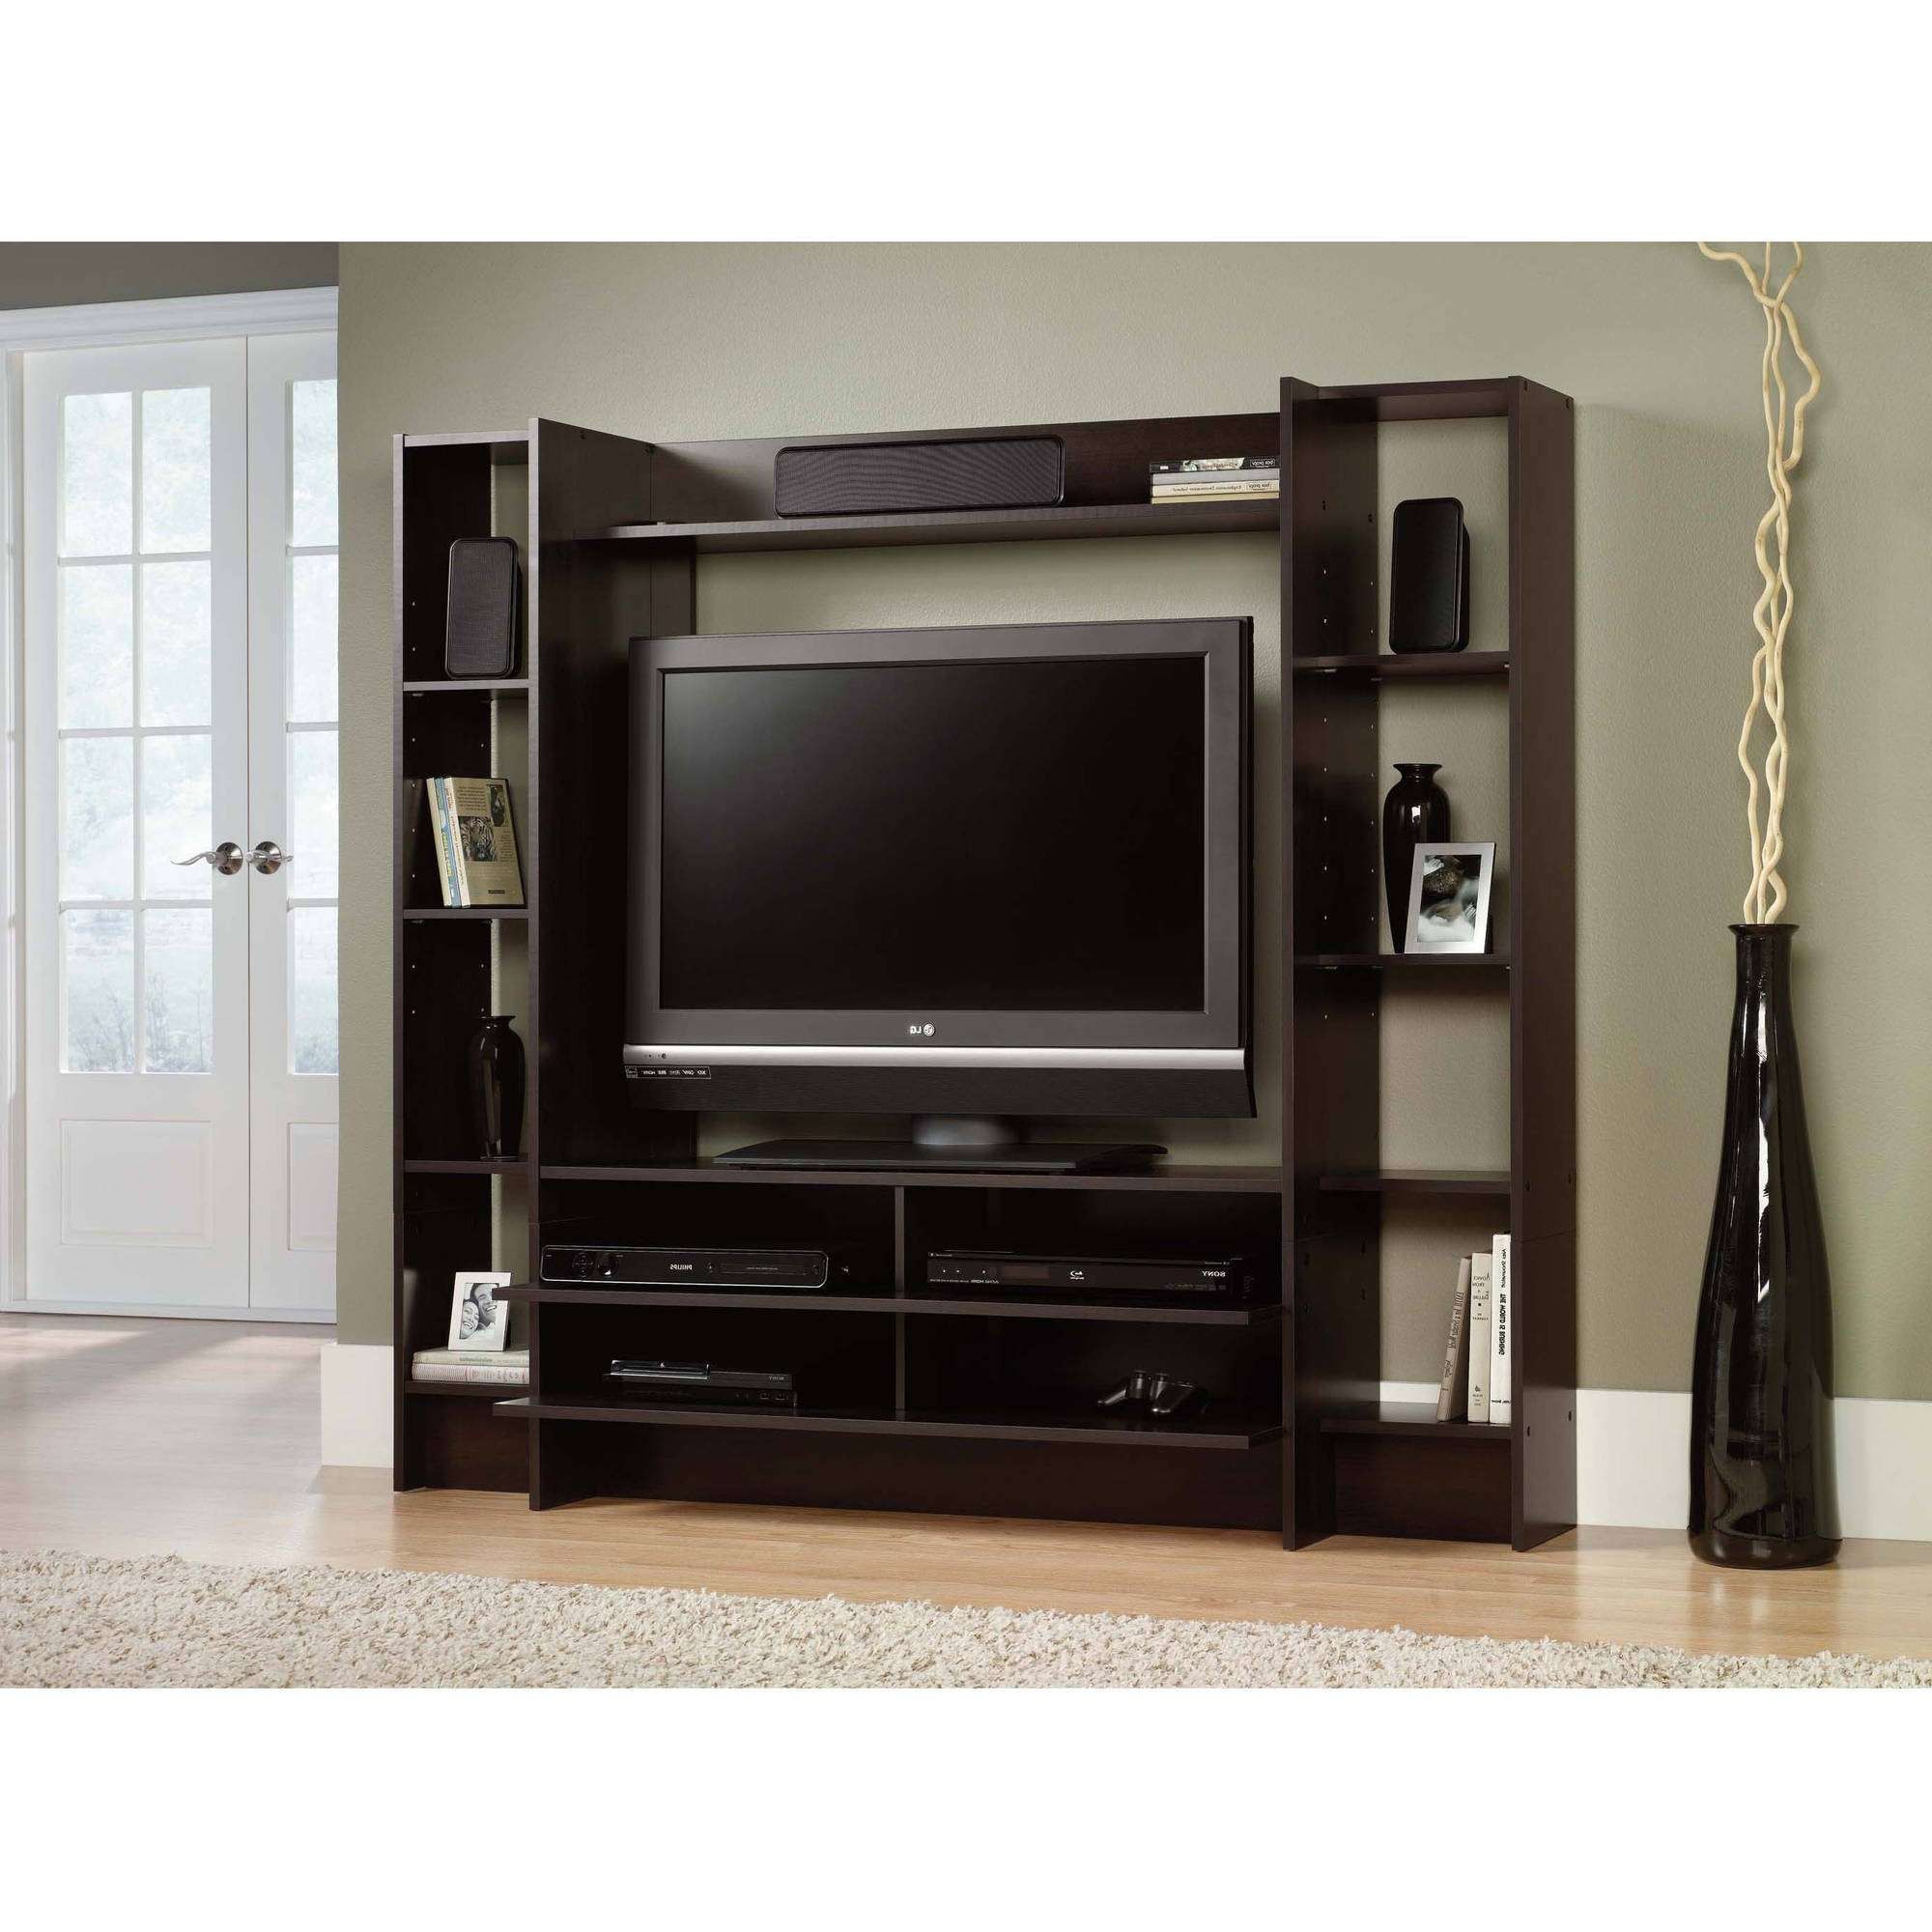 Tv Stands & Entertainment Centers – Walmart Intended For Cheap Wood Tv Stands (View 12 of 15)